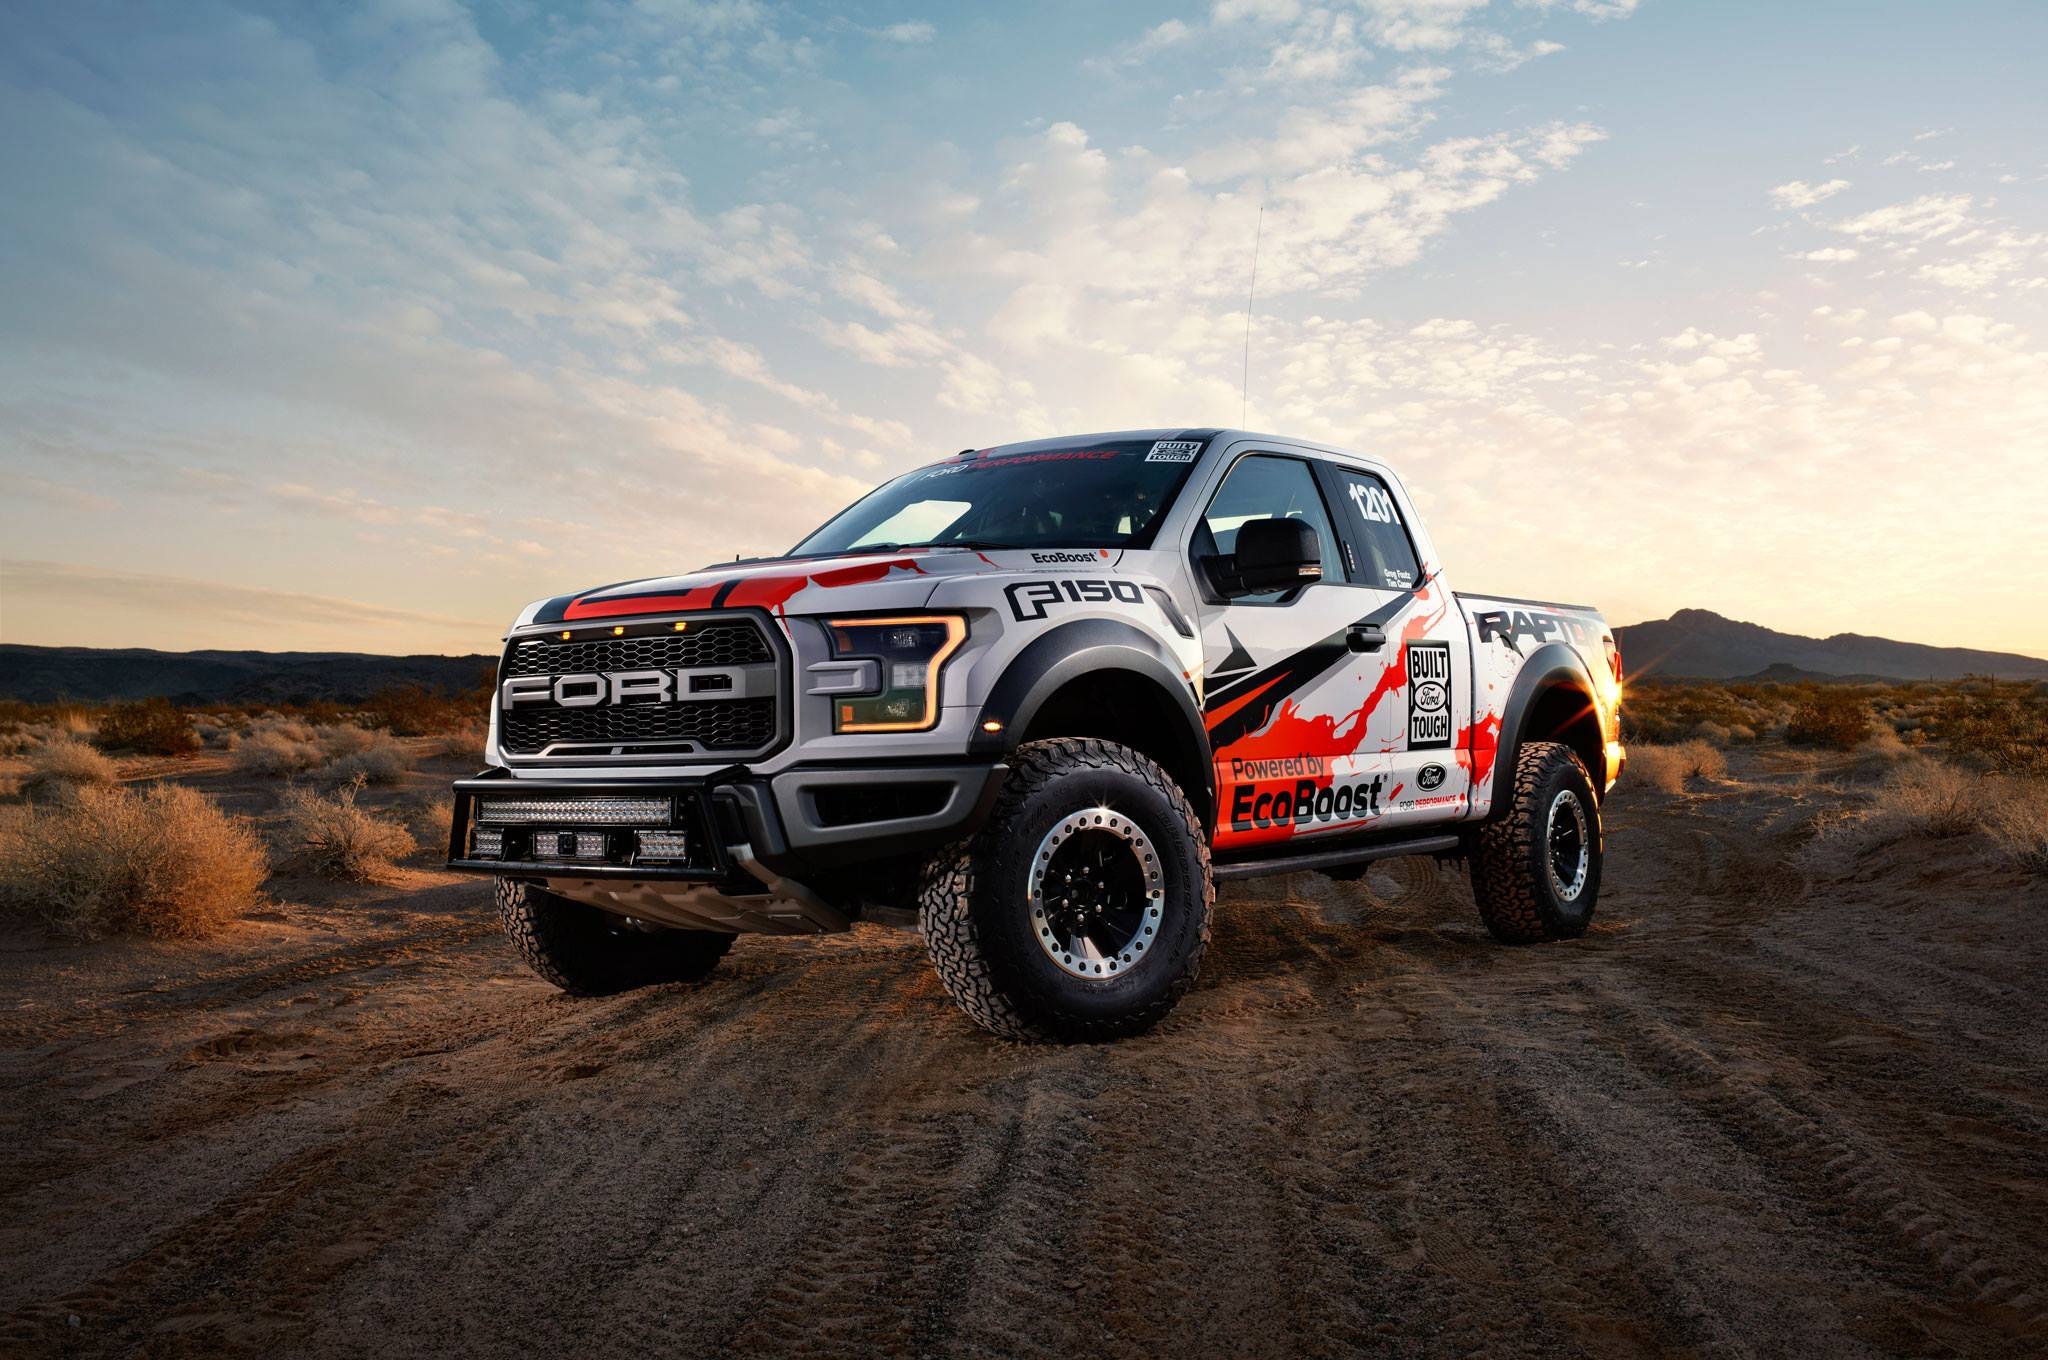 Ford Raptor supercab on Off-road wheels and tires